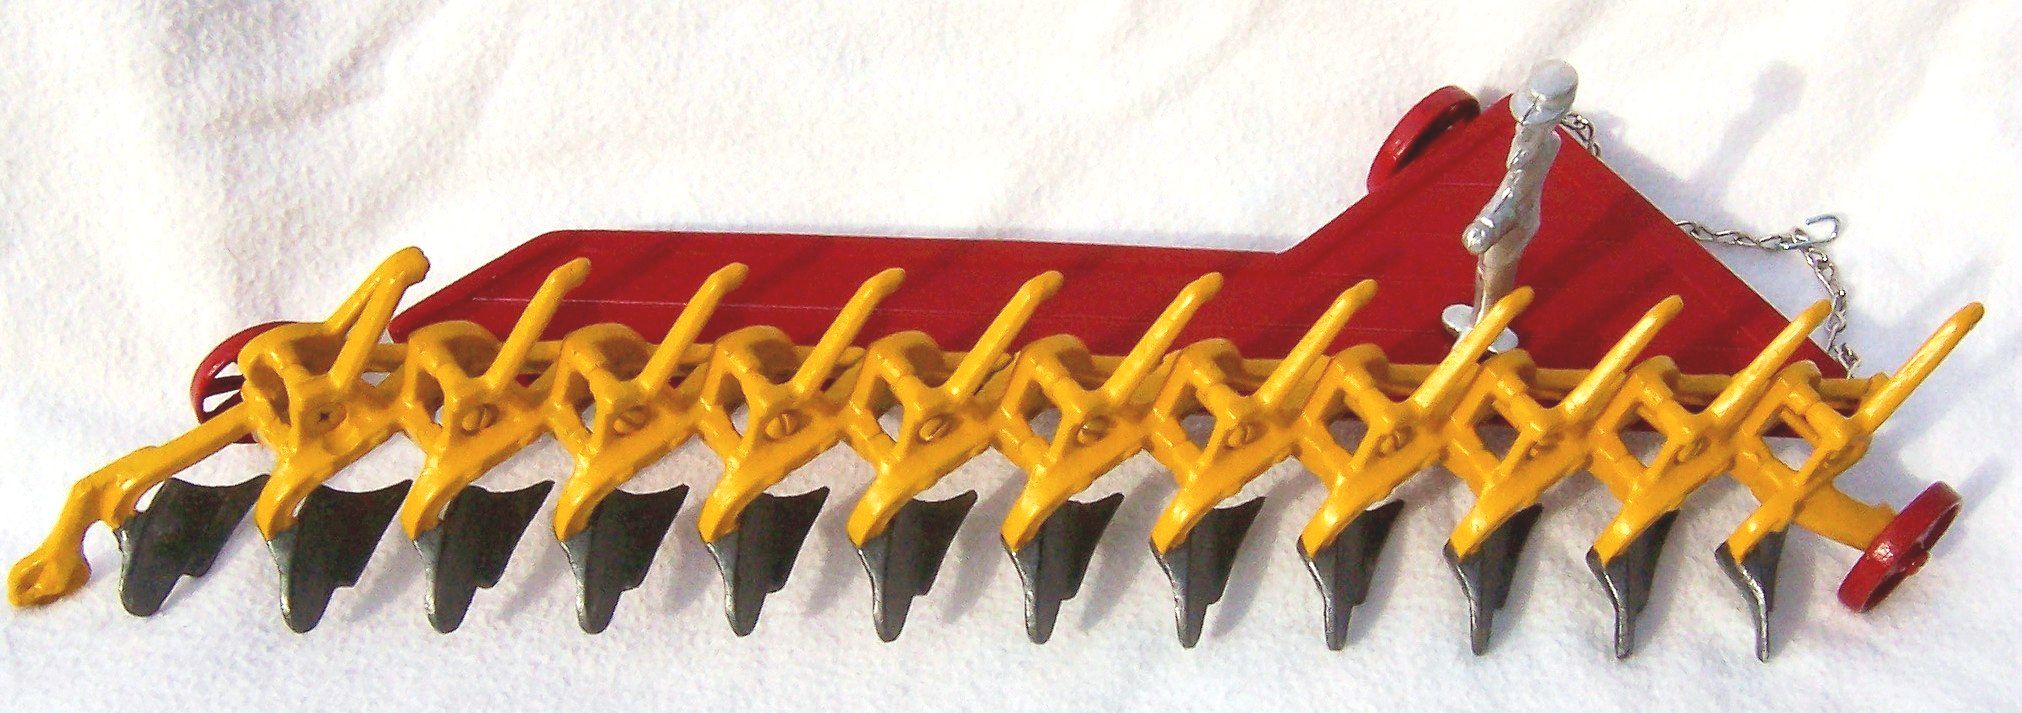 Avery Plow Top View